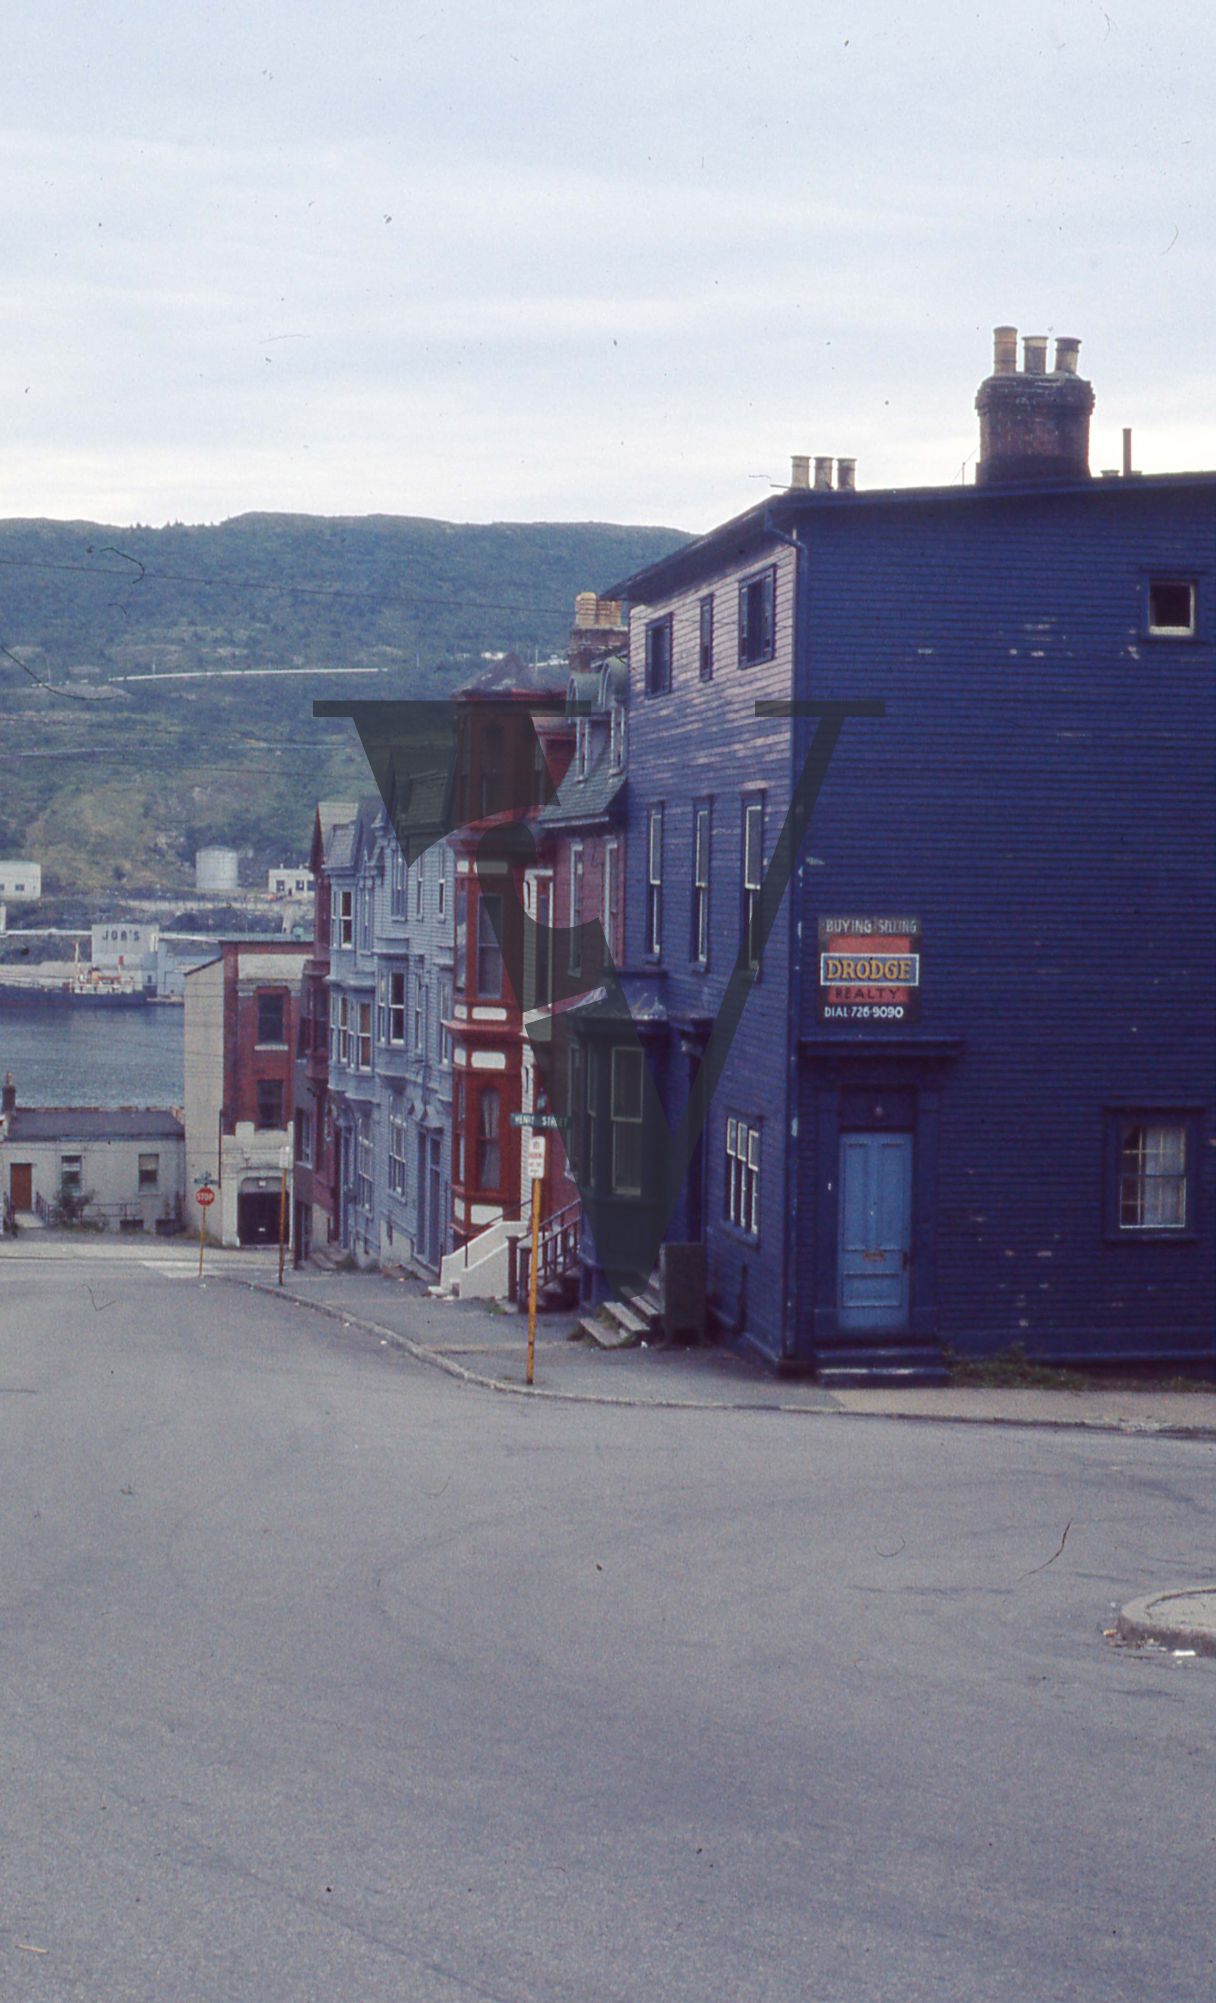 Newfoundland, St. Johns, capital city, street view, Drodge Realty.